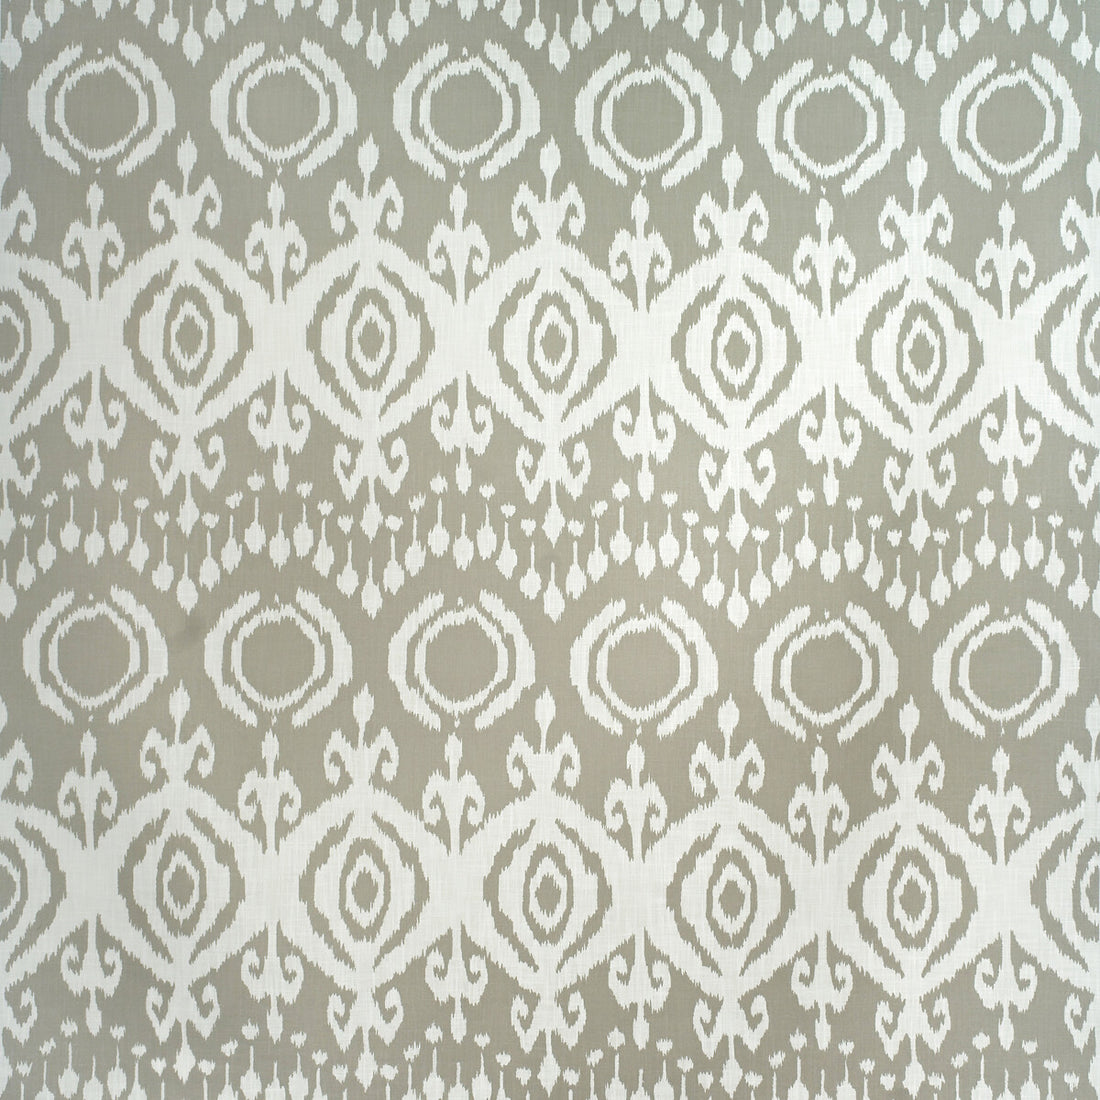 Volcano Outdoor fabric in cloud color - pattern AM100352.11.0 - by Kravet Couture in the Andrew Martin The Great Outdoors collection